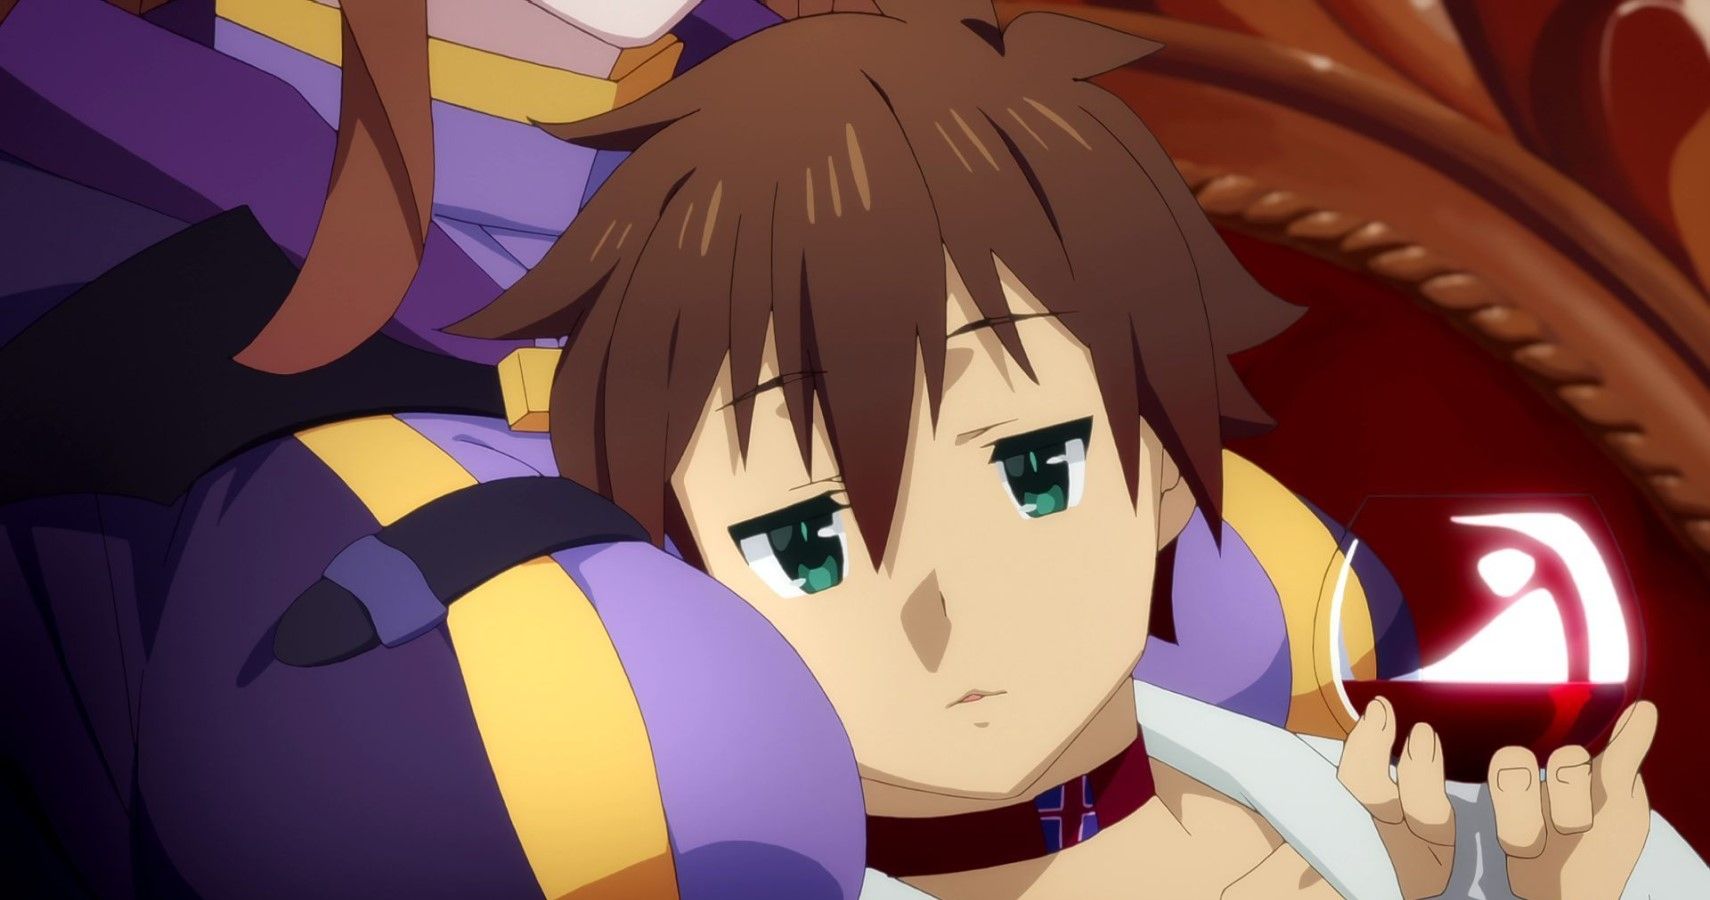 With whom Kazuma ends up with?